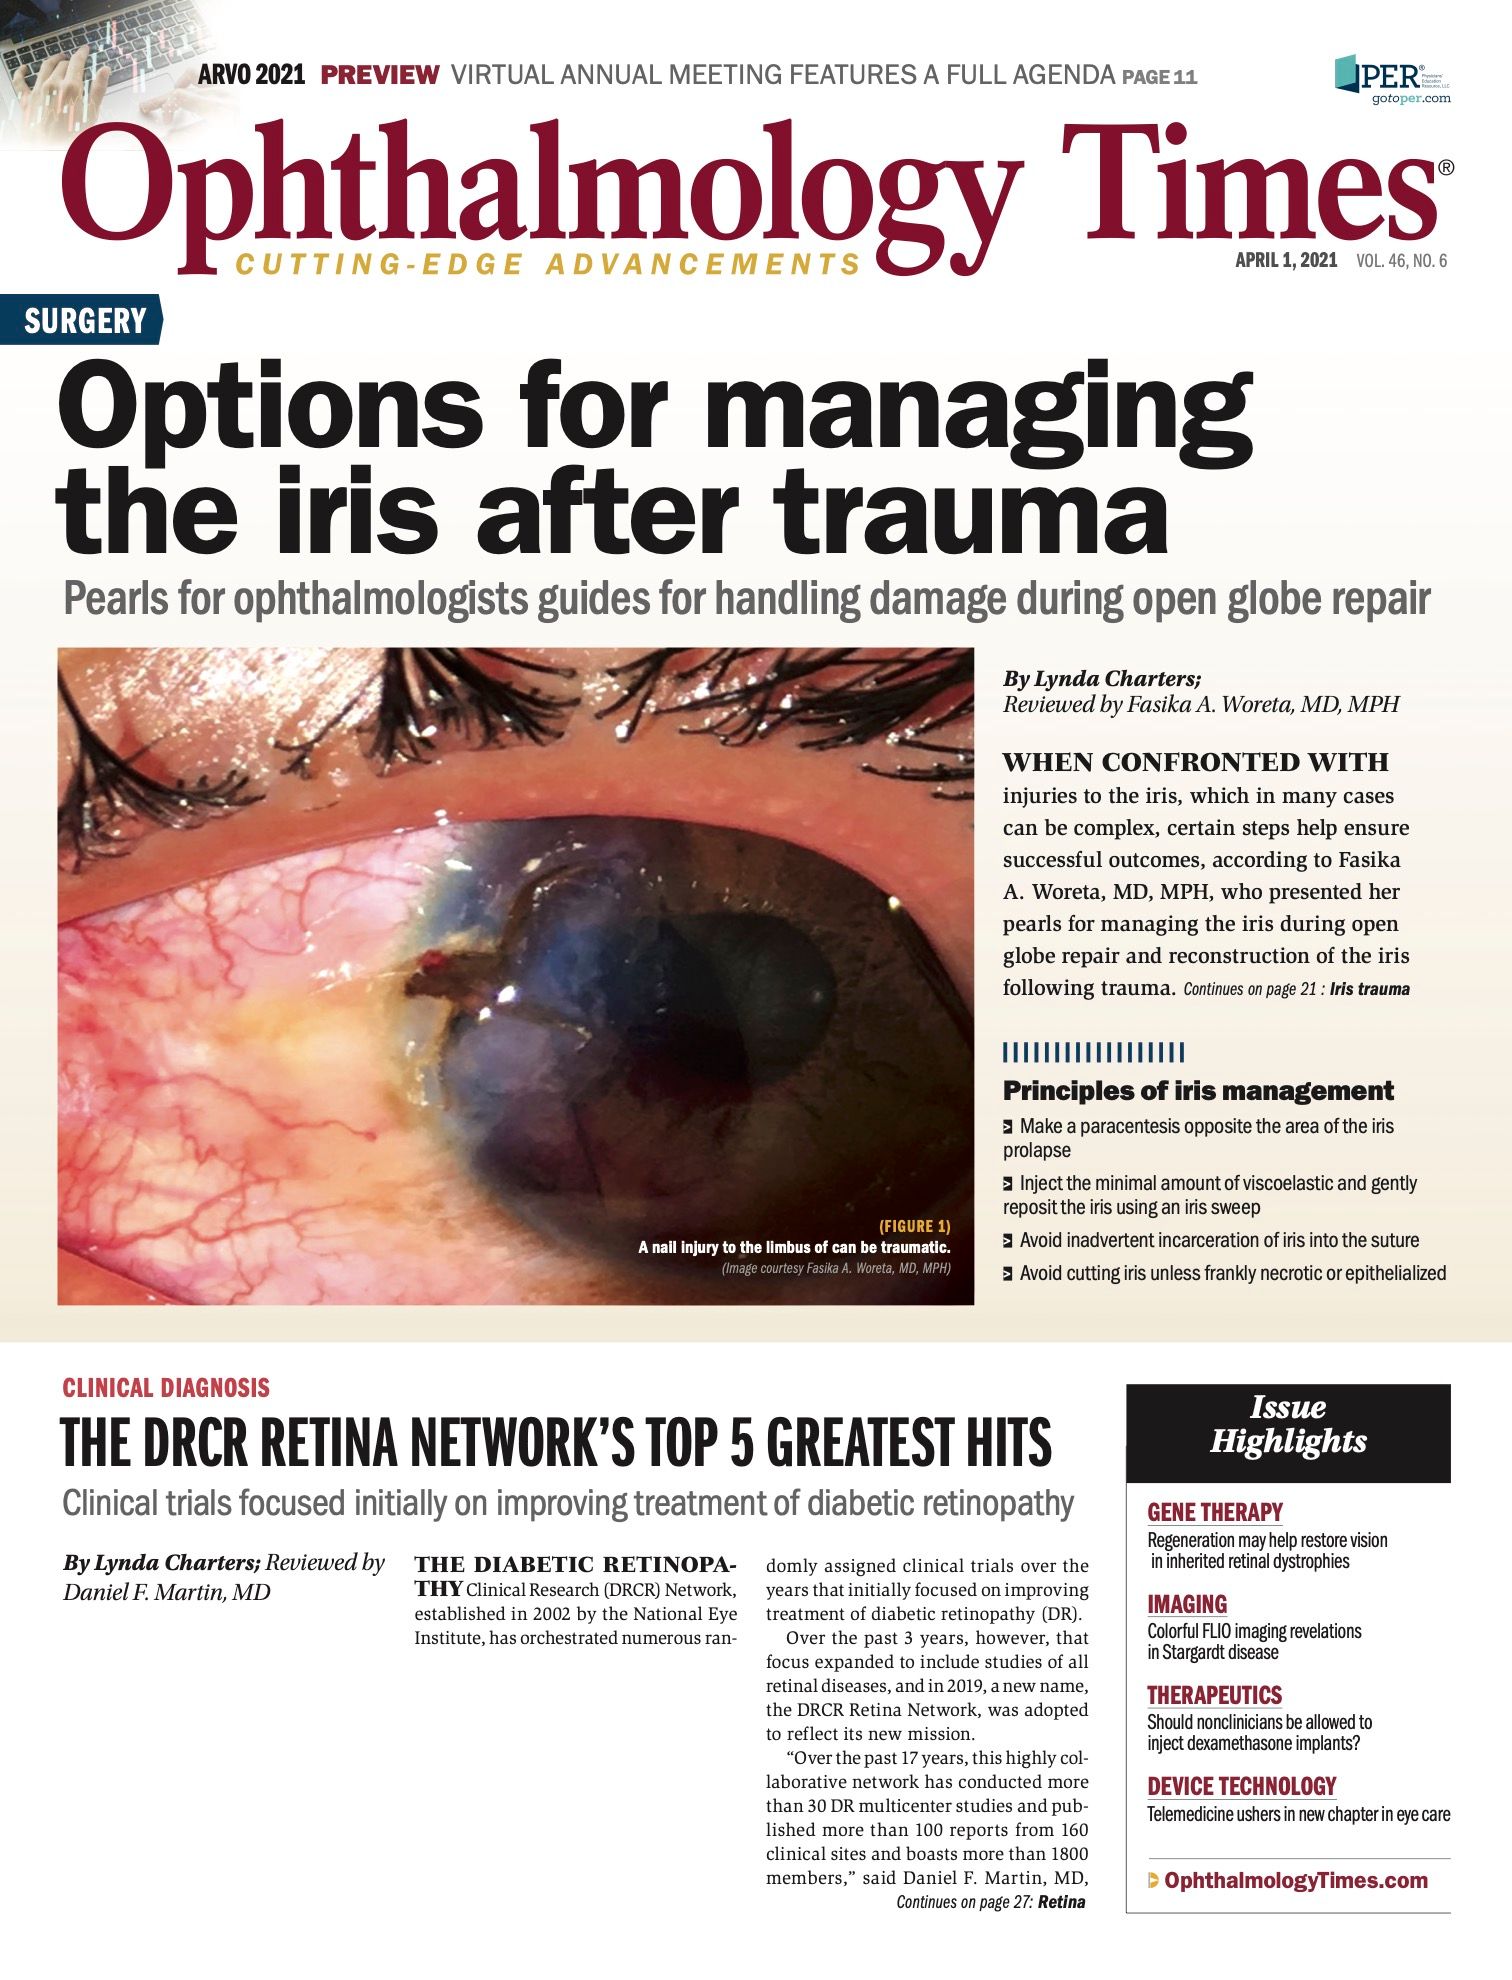 Unplugging The Clogged Drain In Glaucoma IOP